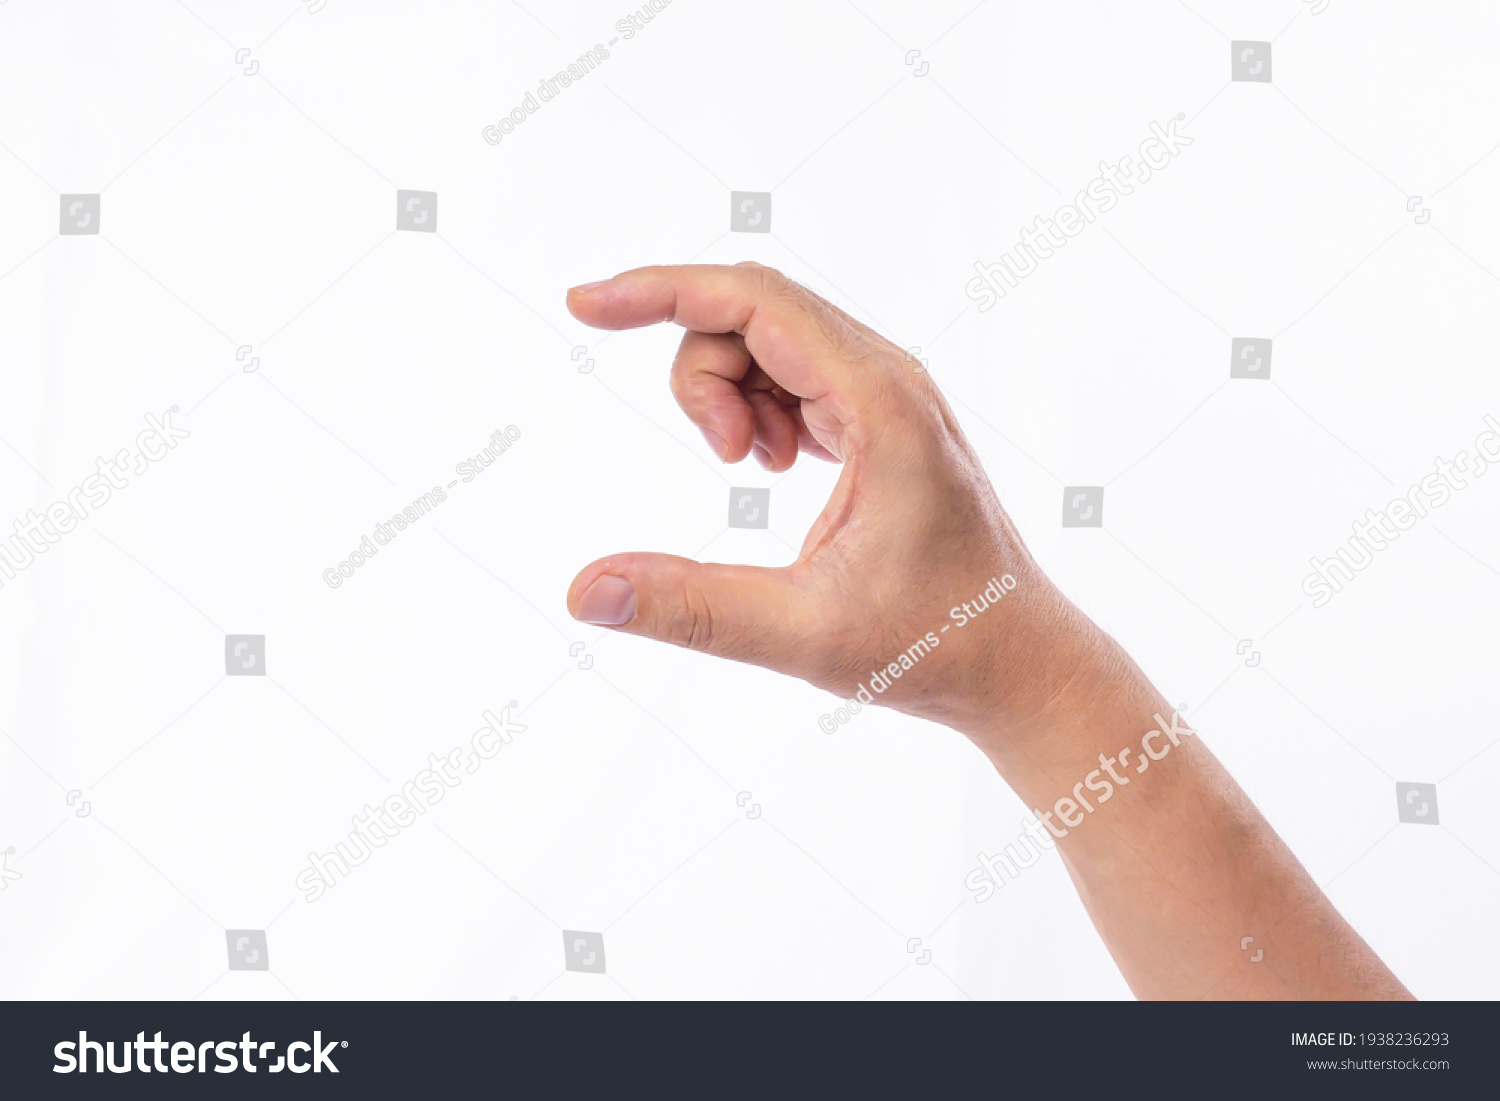 Hand holding. Grasping hands. Holding gesture. Man hands. Isolated on white Holding objects White background #1938236293